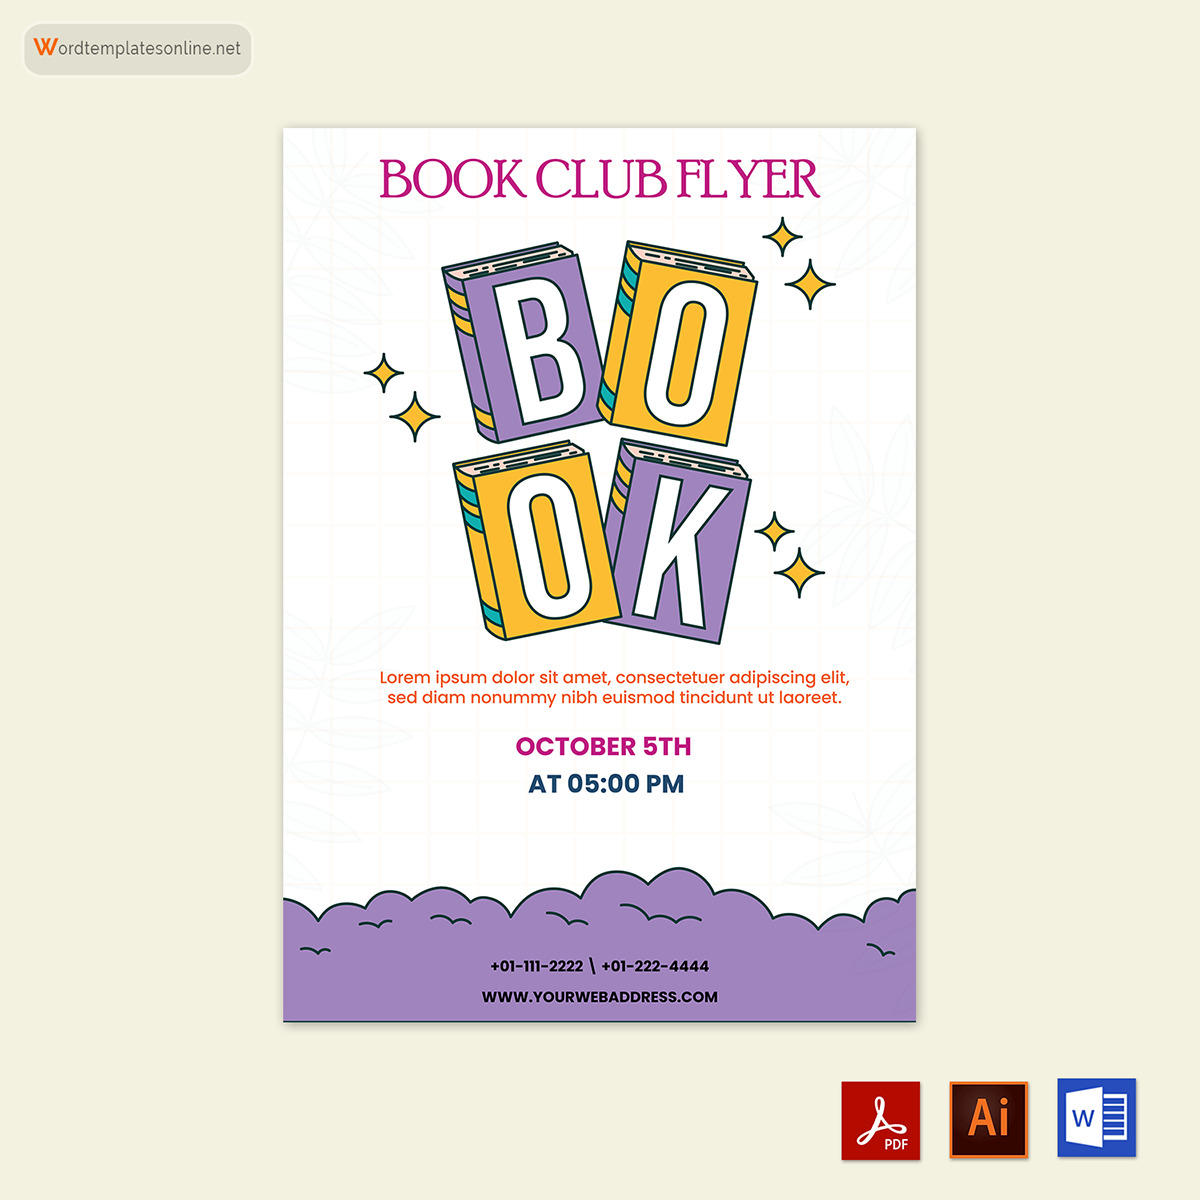 Book Club Flyer Templates - Free Word, PSD, AI Illustrations